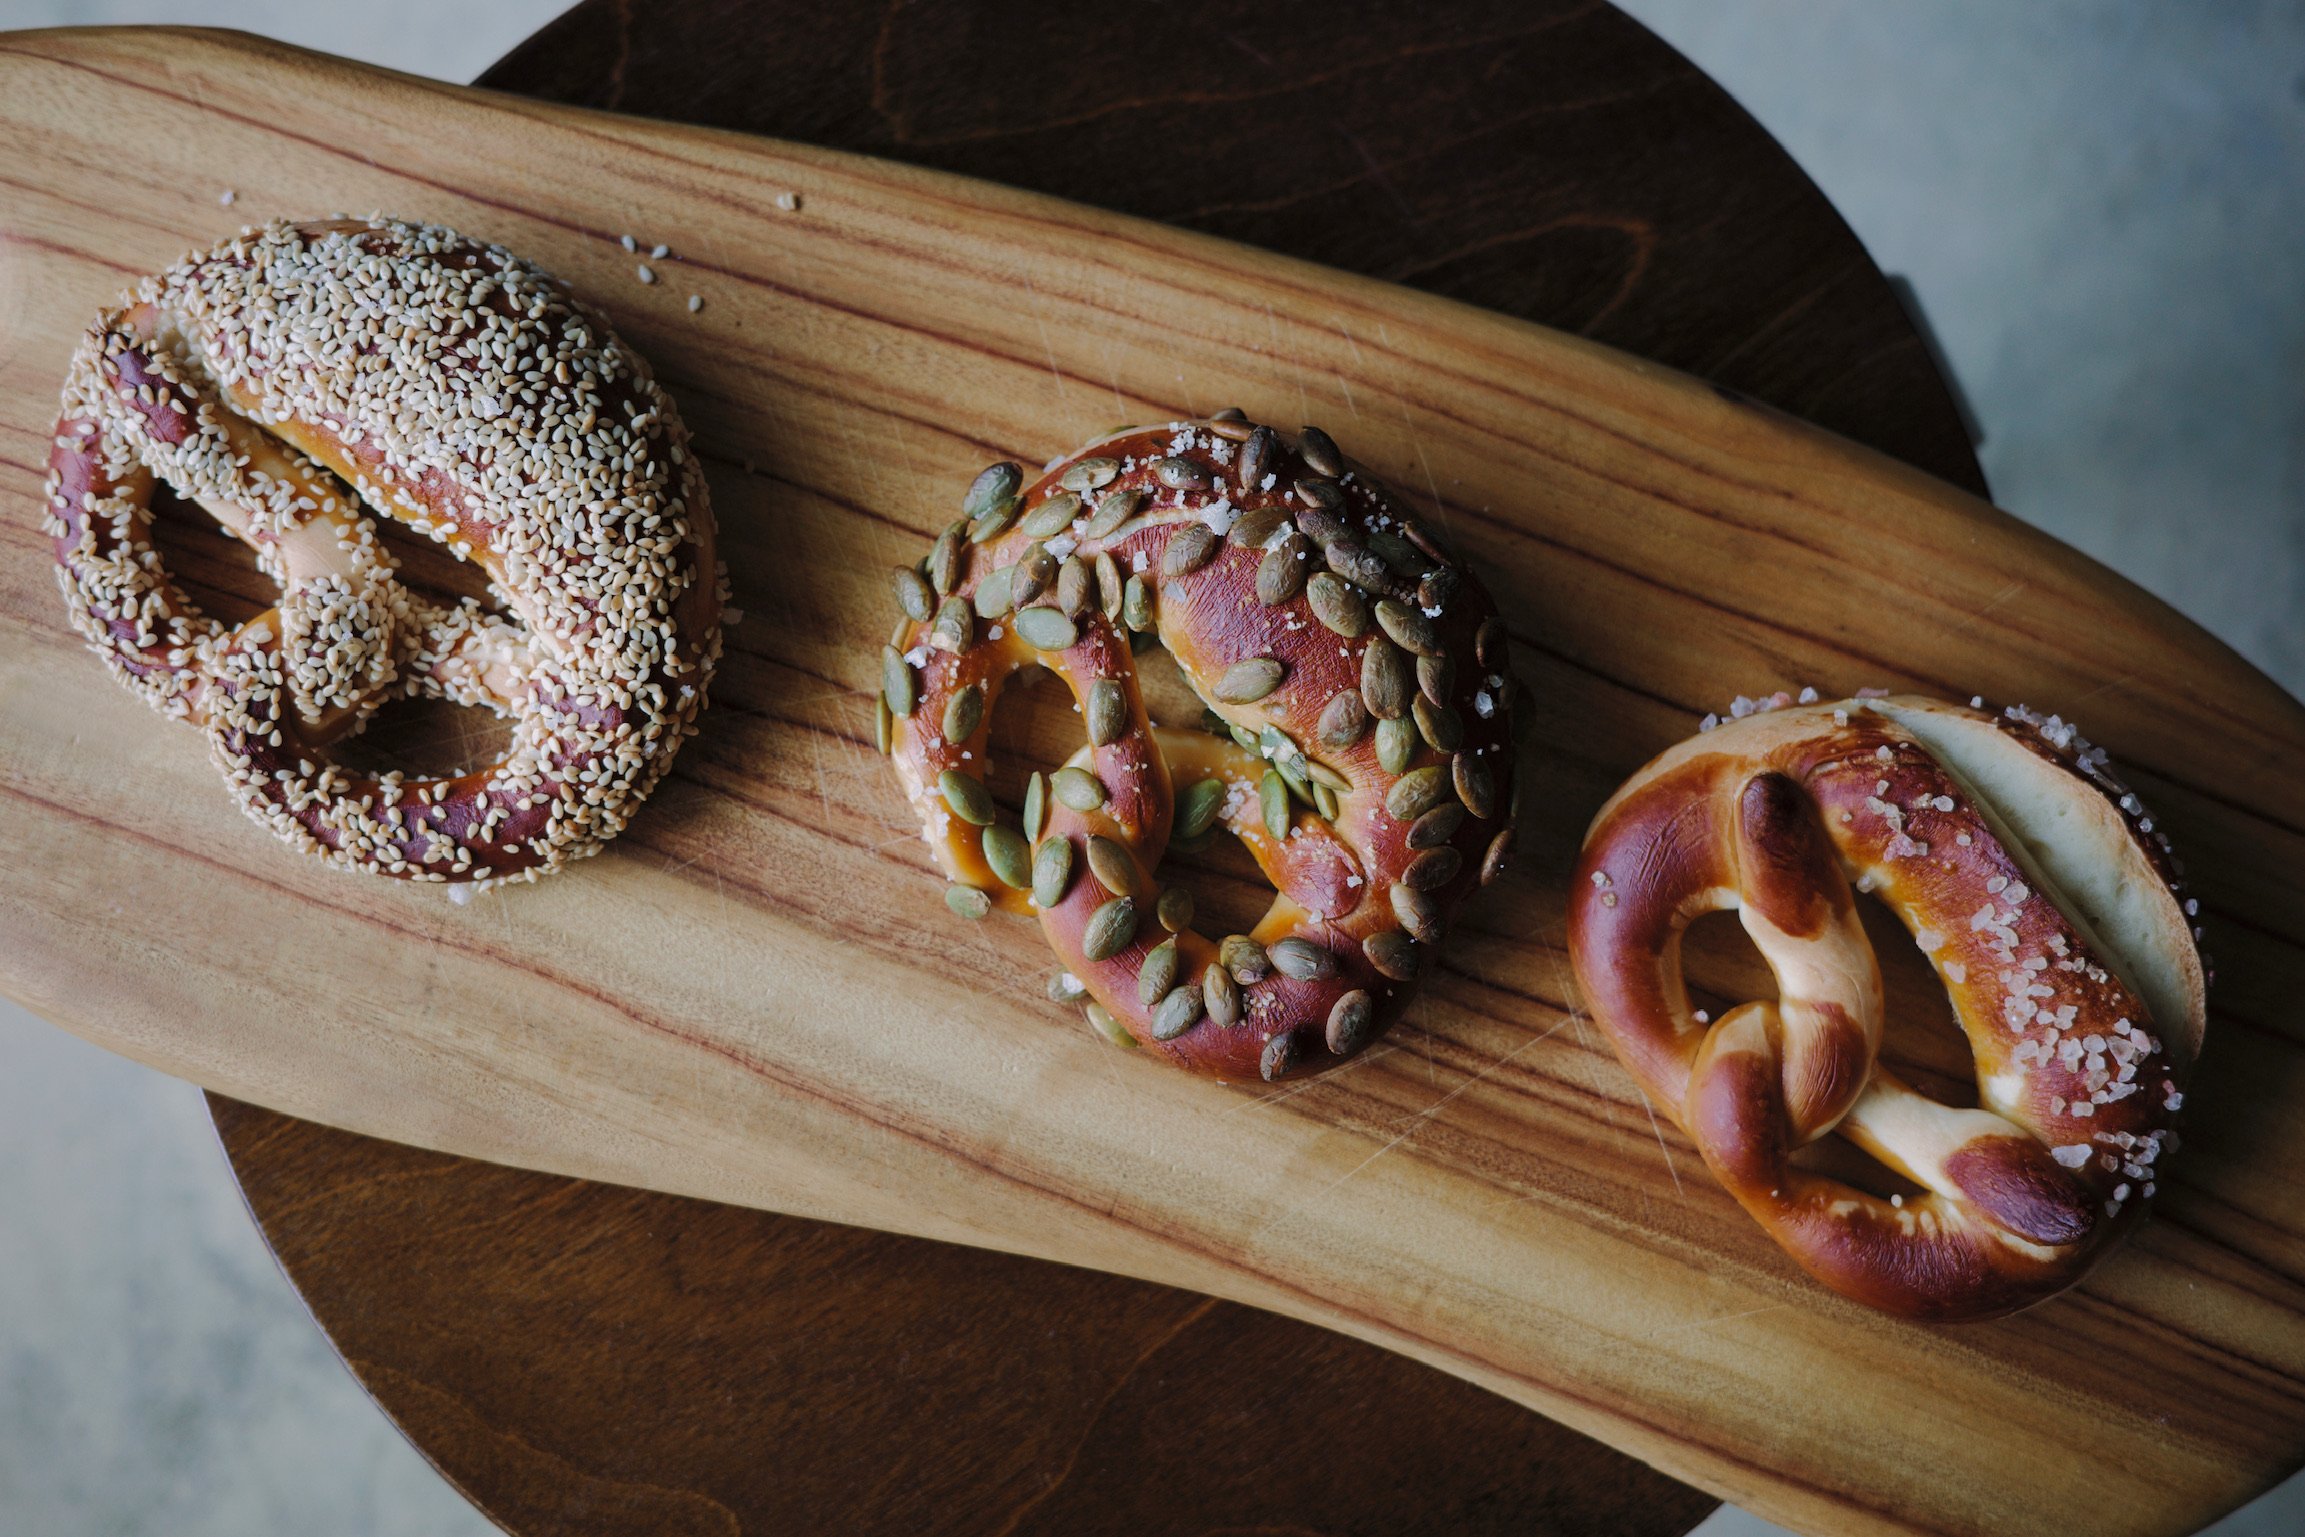 Overhead shot of three pretzels, one covered in sesame, one covered in pumpkin seeds, and one lightly salted, in a row on a irregularly shaped wooden board, on top of a dark walnut stool.